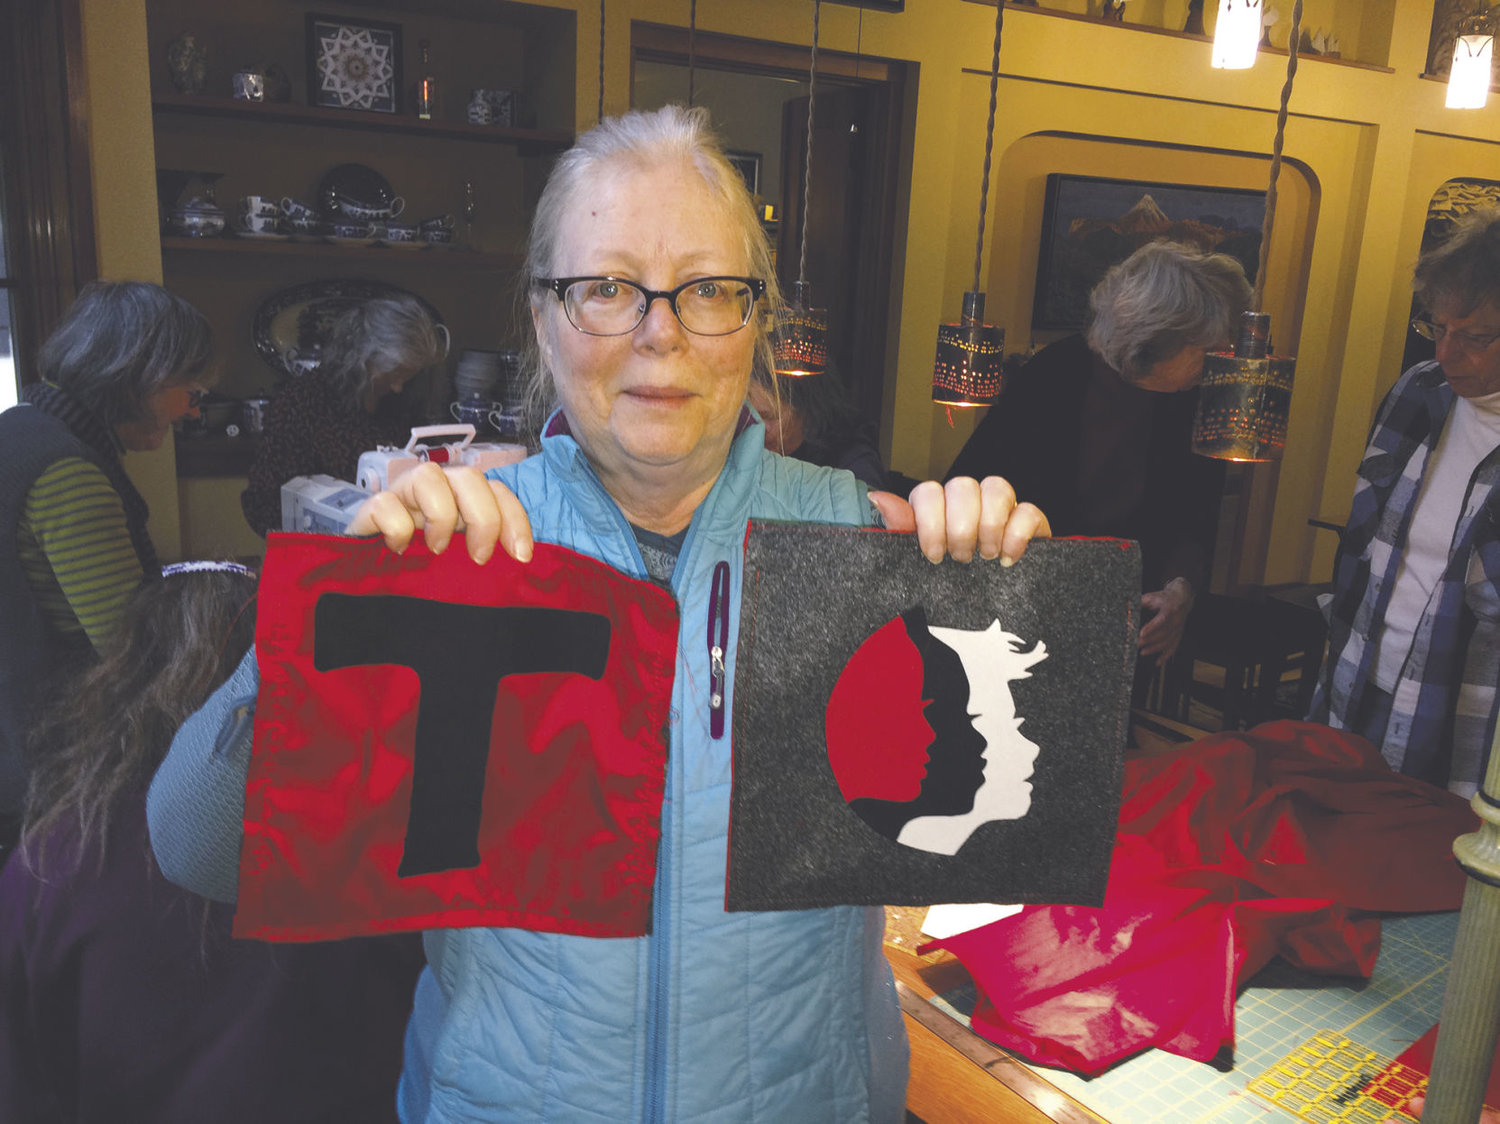 Anita Edwards holds up two blocks of a handmade sign she designed that is being made especially for a Seattle Womxn’s March on Saturday, Jan. 21. Women and men gathered Sunday, Jan. 8 at her home to help piece the sign together. Photo by Allison Arthur